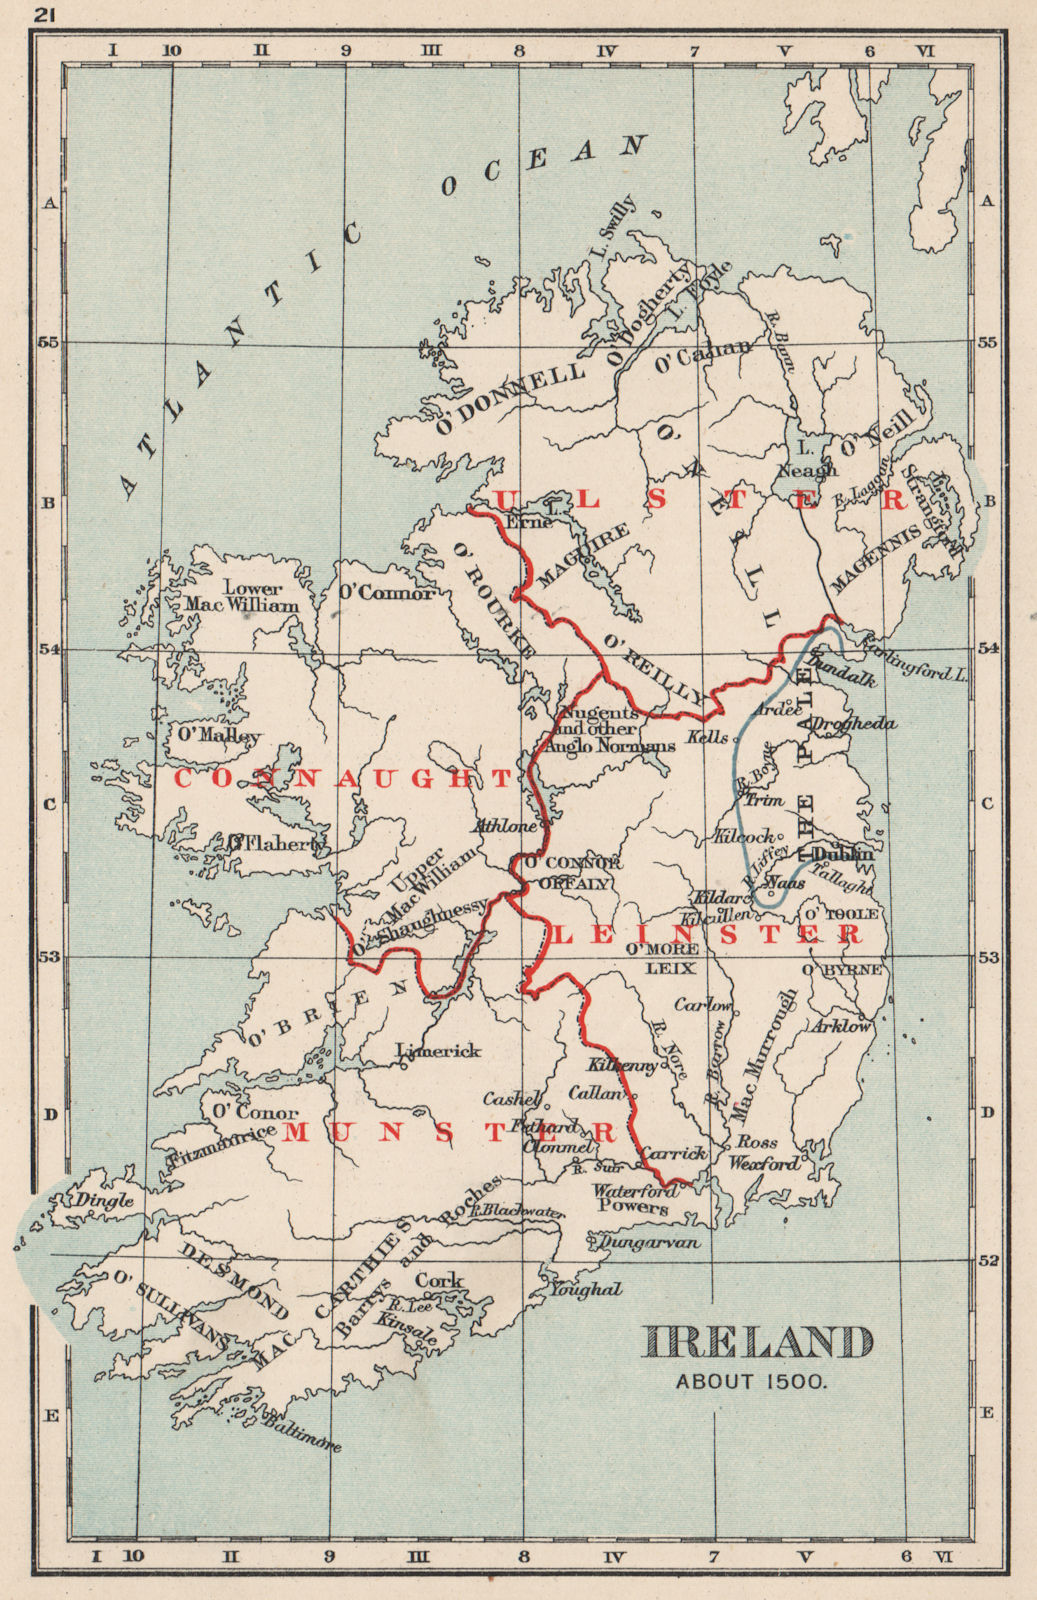 IRELAND IN 1500. Showing clan names kingdoms "The Pale" provinces 1907 old map